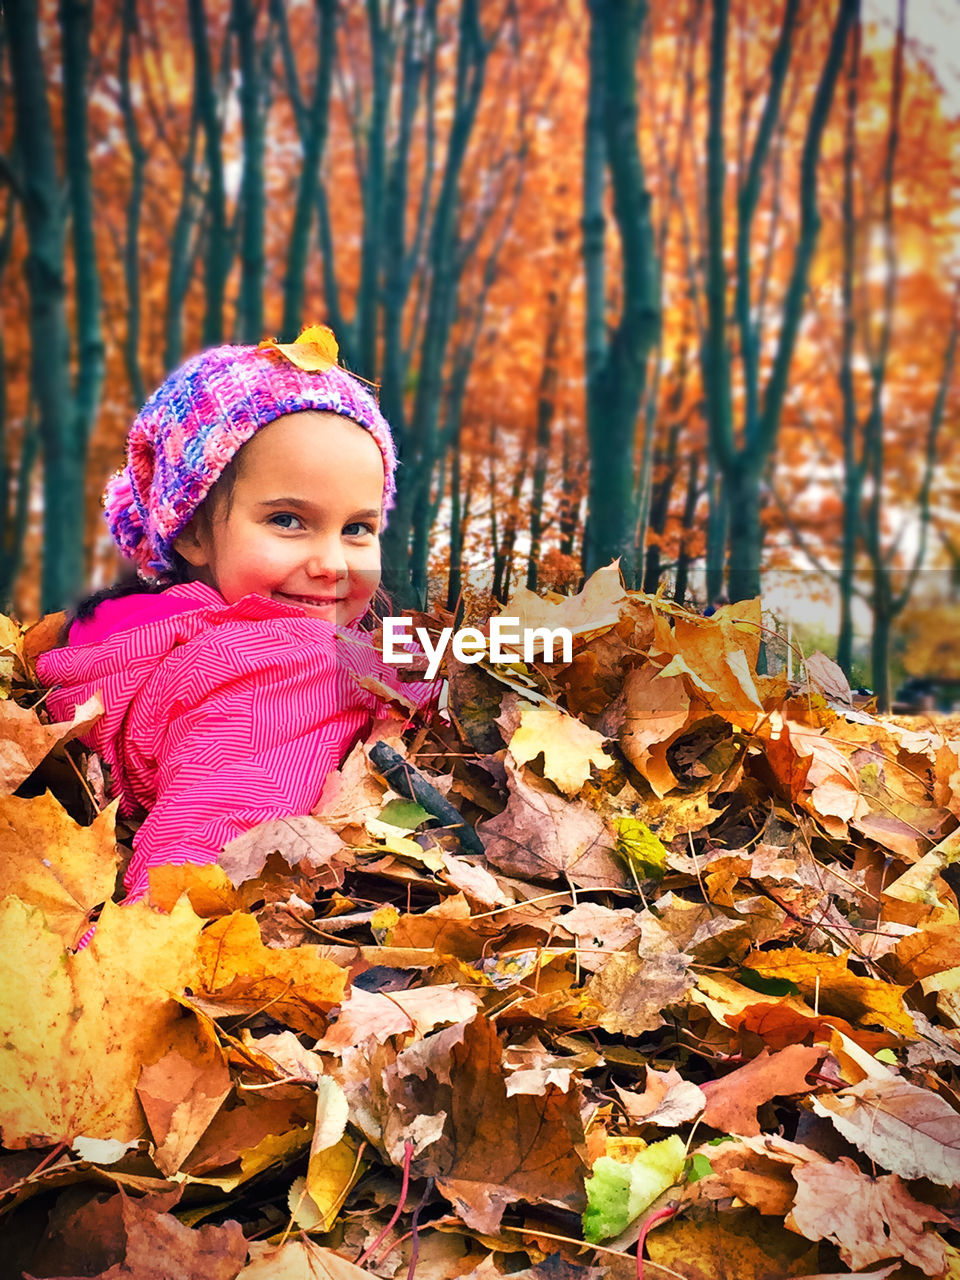 GIRL IN AUTUMN LEAVES ON TREE